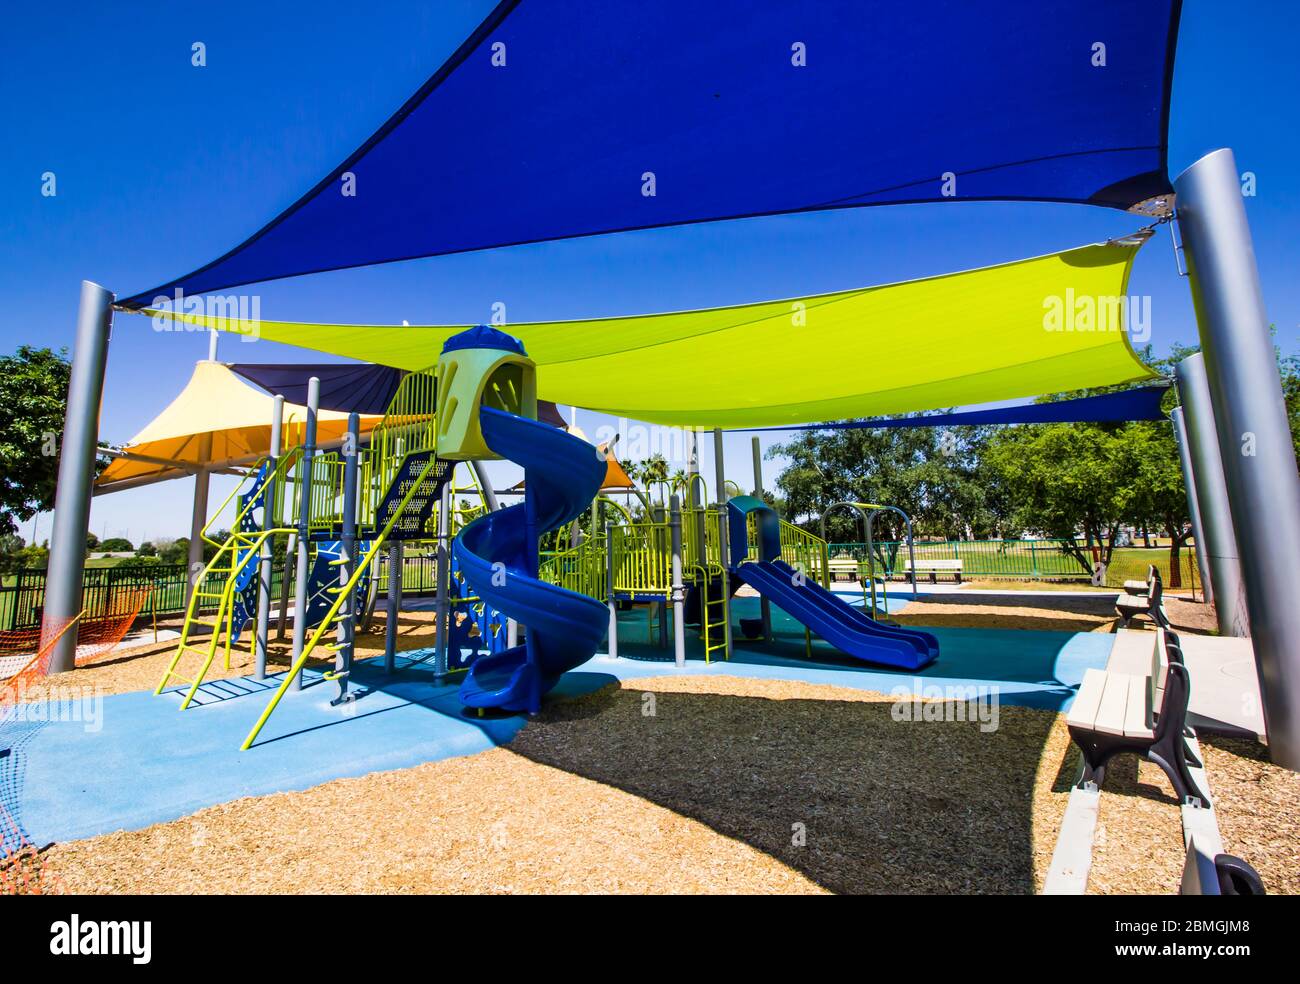 Colorful Shade Canopies Covering Kids Playground Equipment Stock Photo